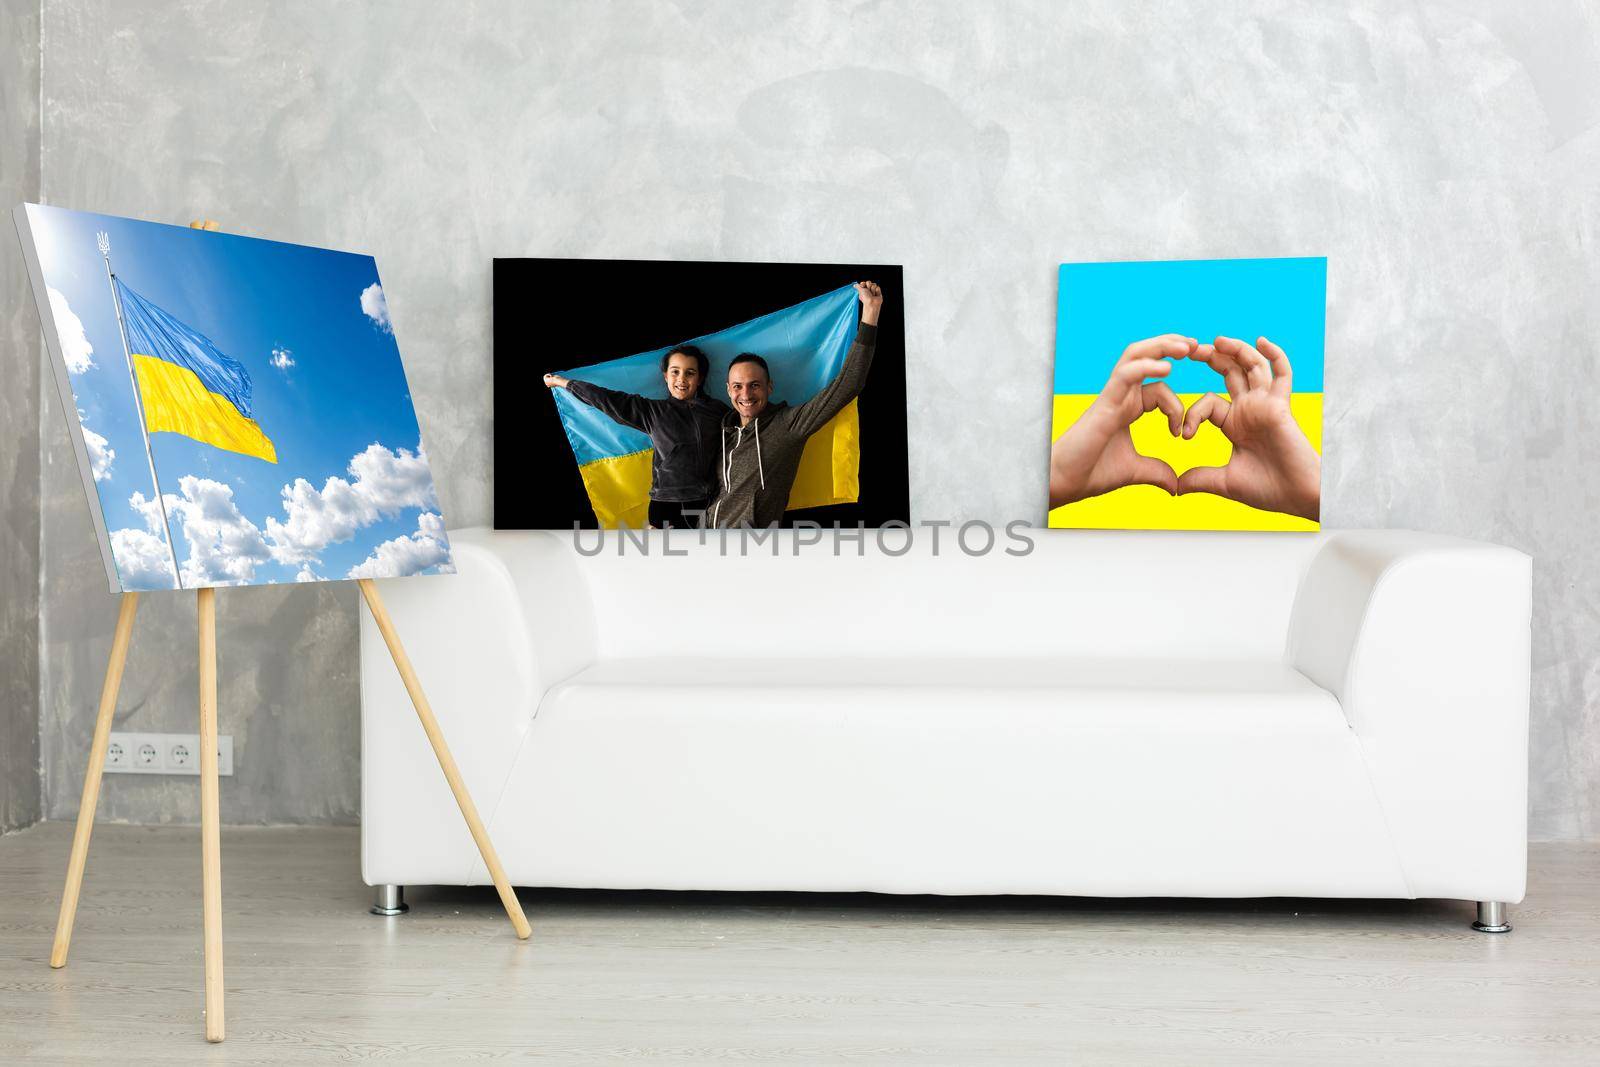 flag of ukraine oil painting on canvas. photo canvas with the flag of Ukraine.